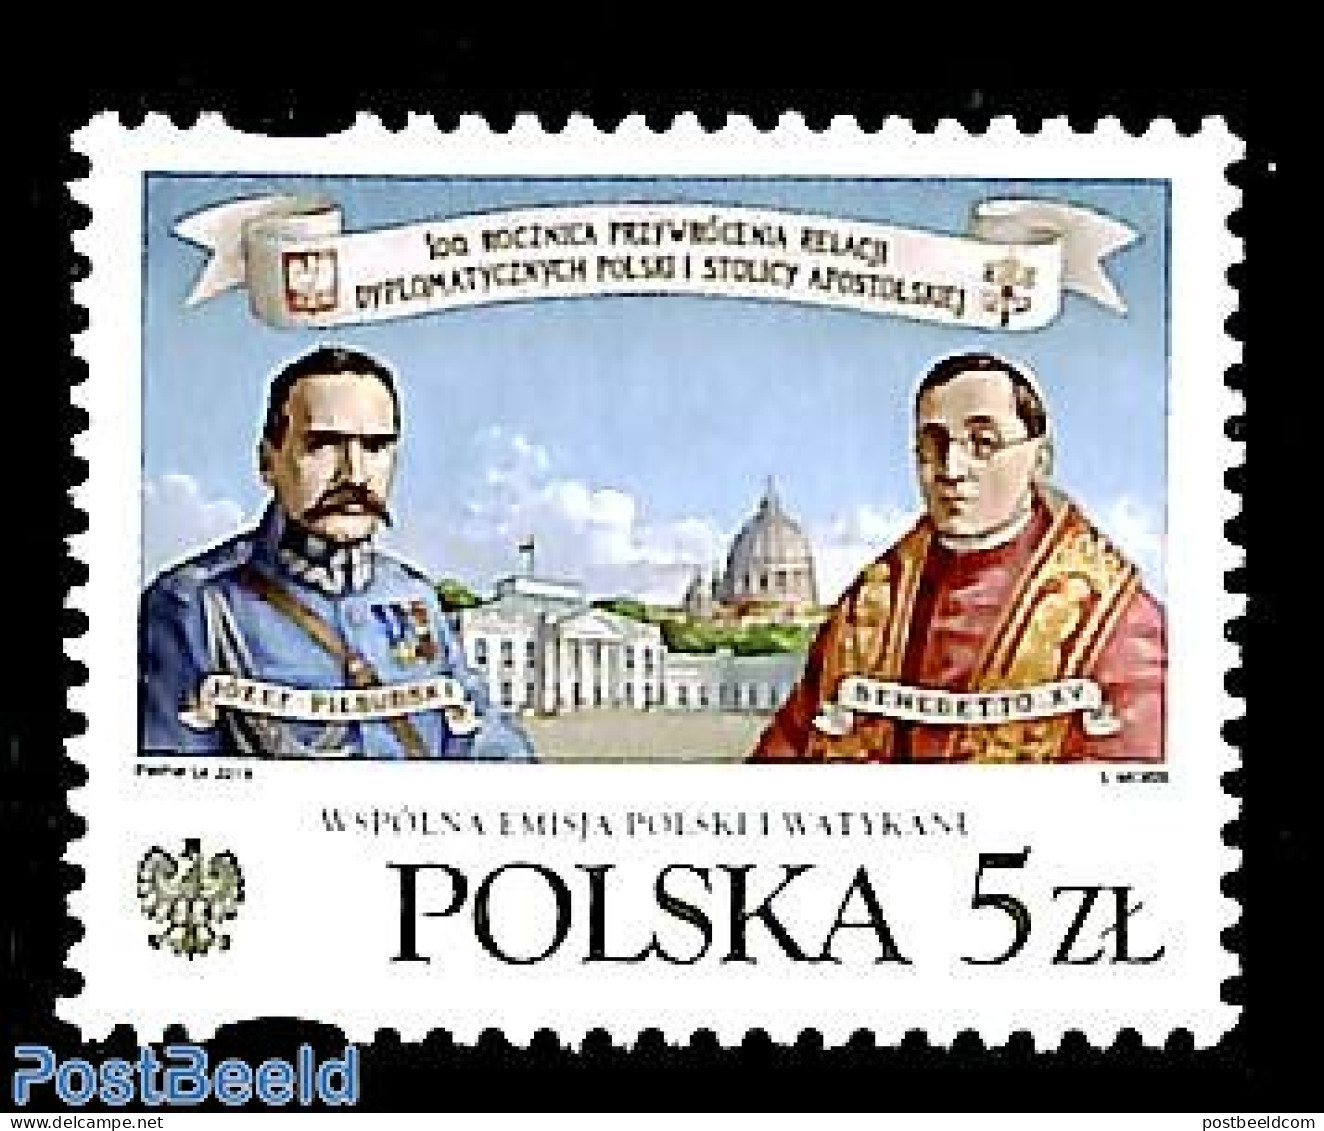 Poland 2019 Diplomatic Relations With Vatican 1v, Mint NH, Religion - Various - Religion - Joint Issues - Nuovi